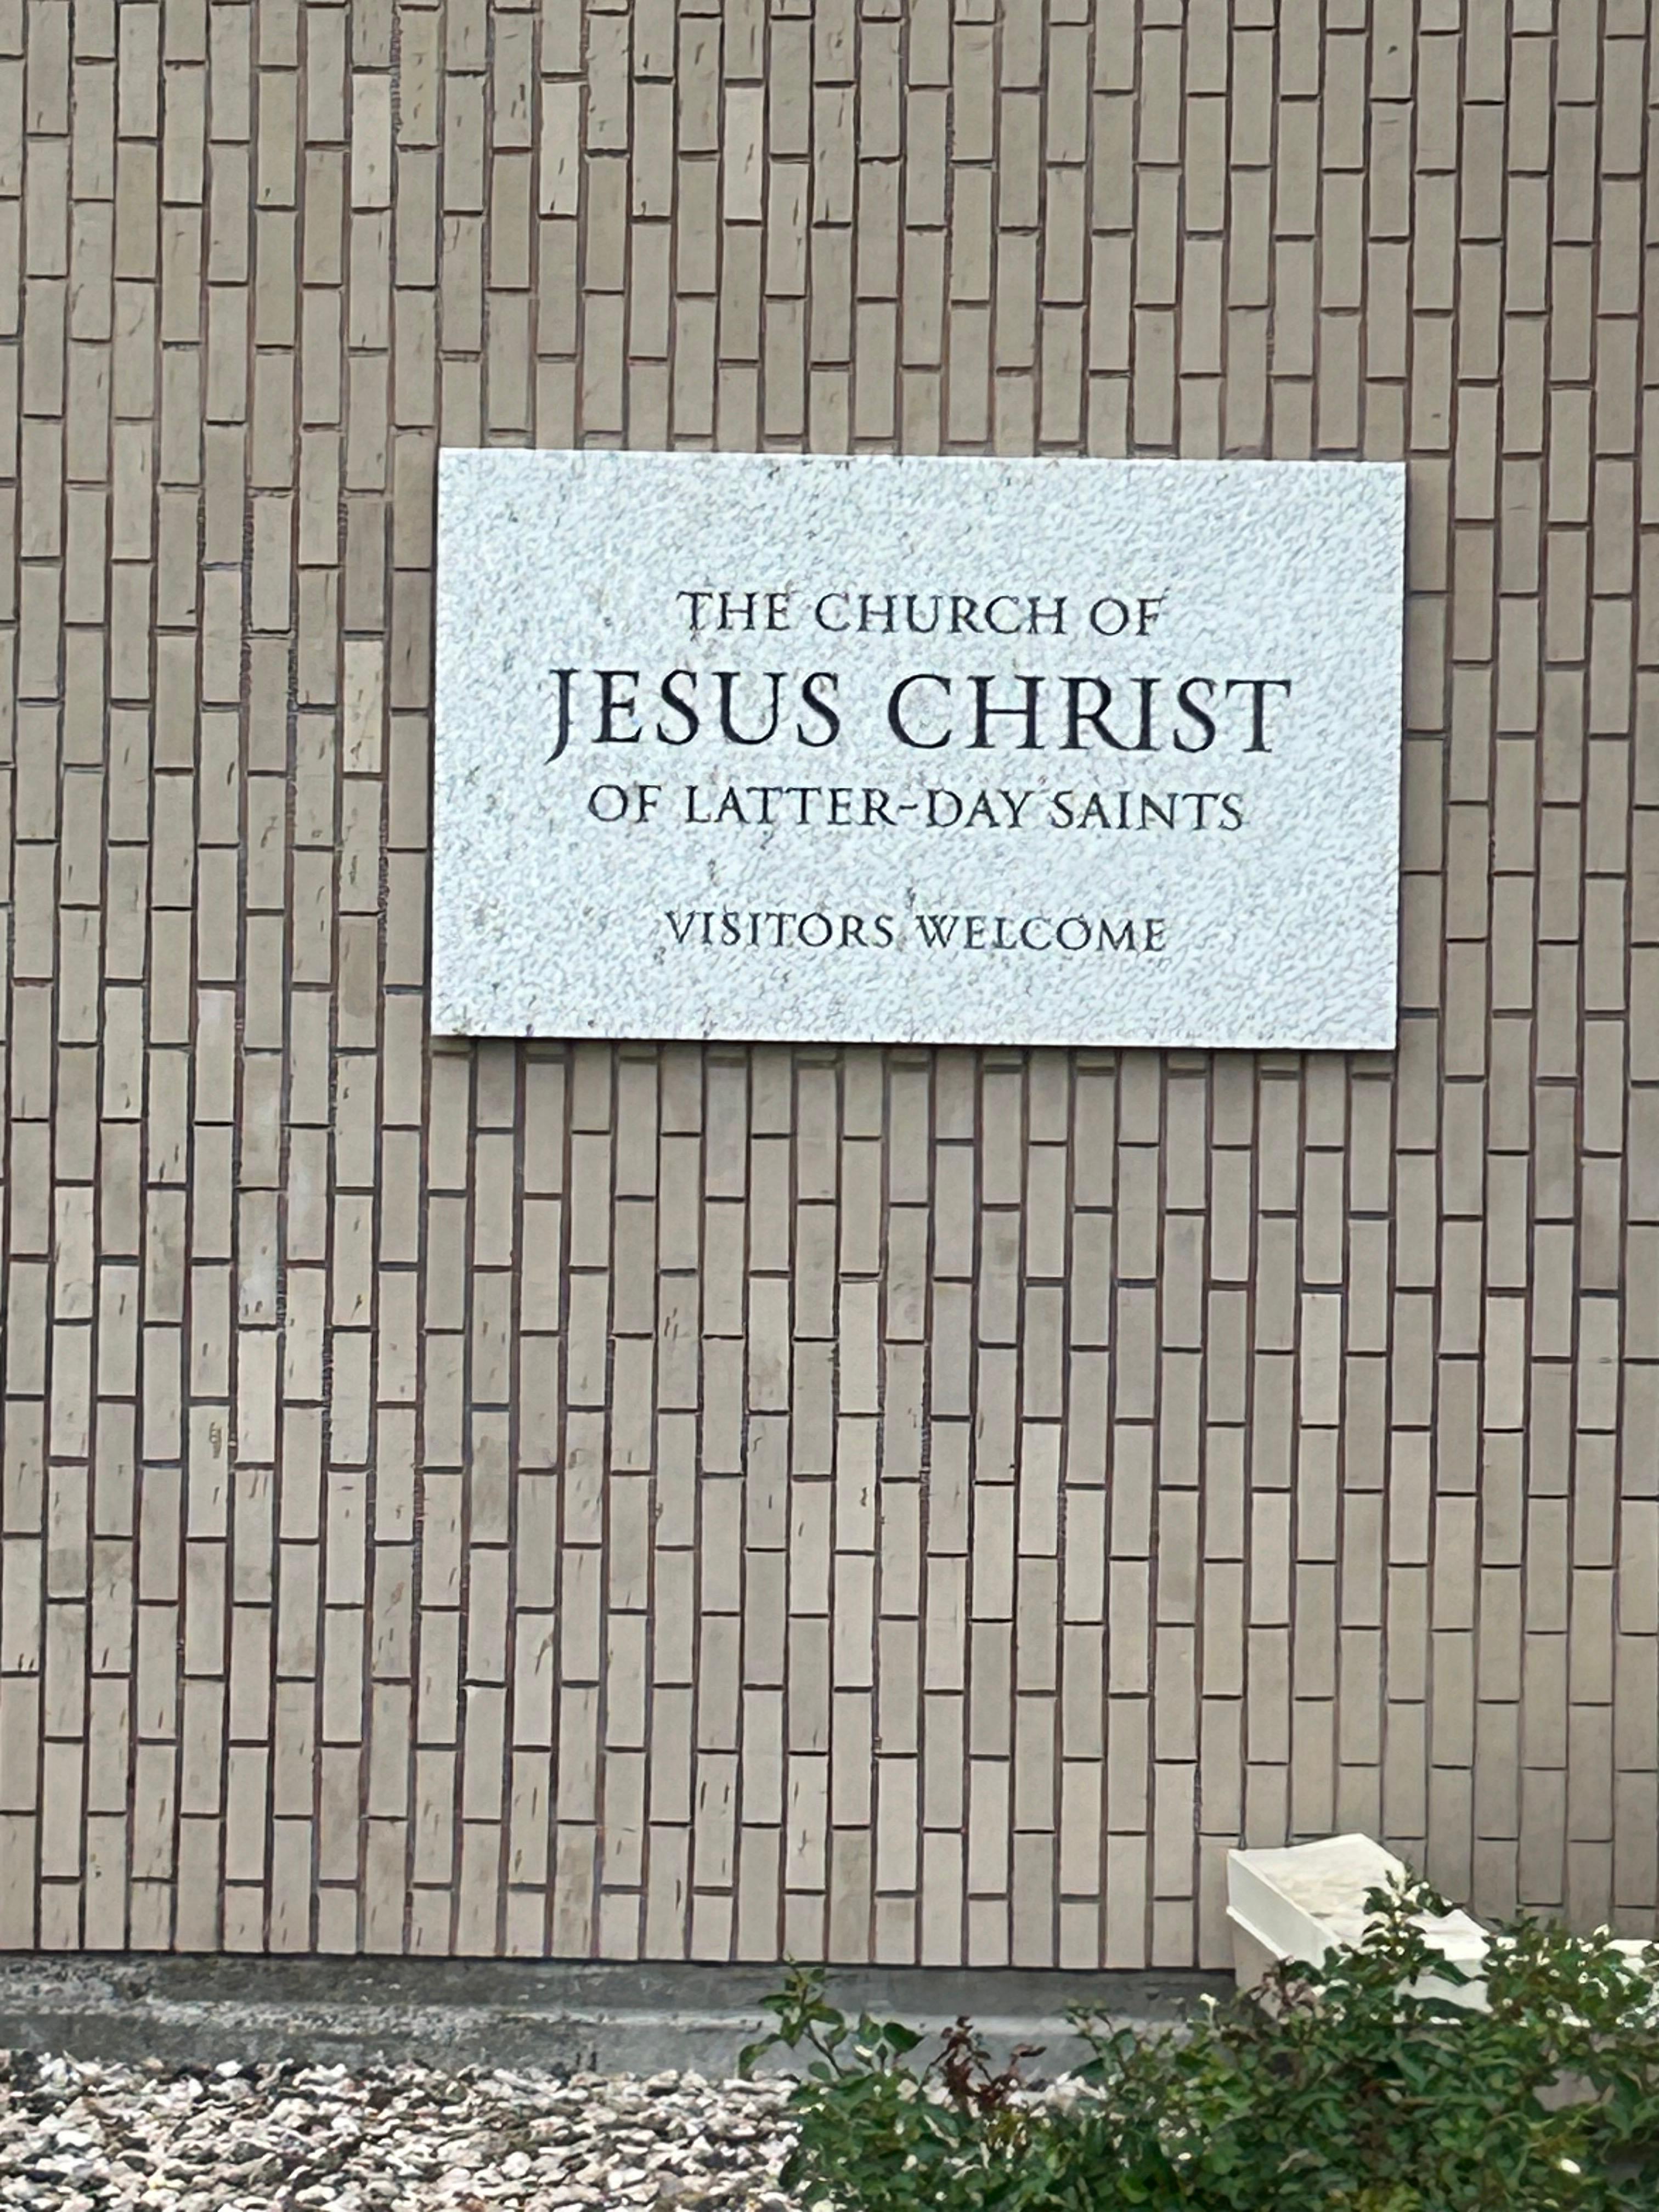 Plaque on the outside of the Fort Hall Building of The Church of Jesus Christ of Latter-Day Saints located at 333 South Treaty Hwy (US 91)
in Pocatello, ID. Visitors Welcome.